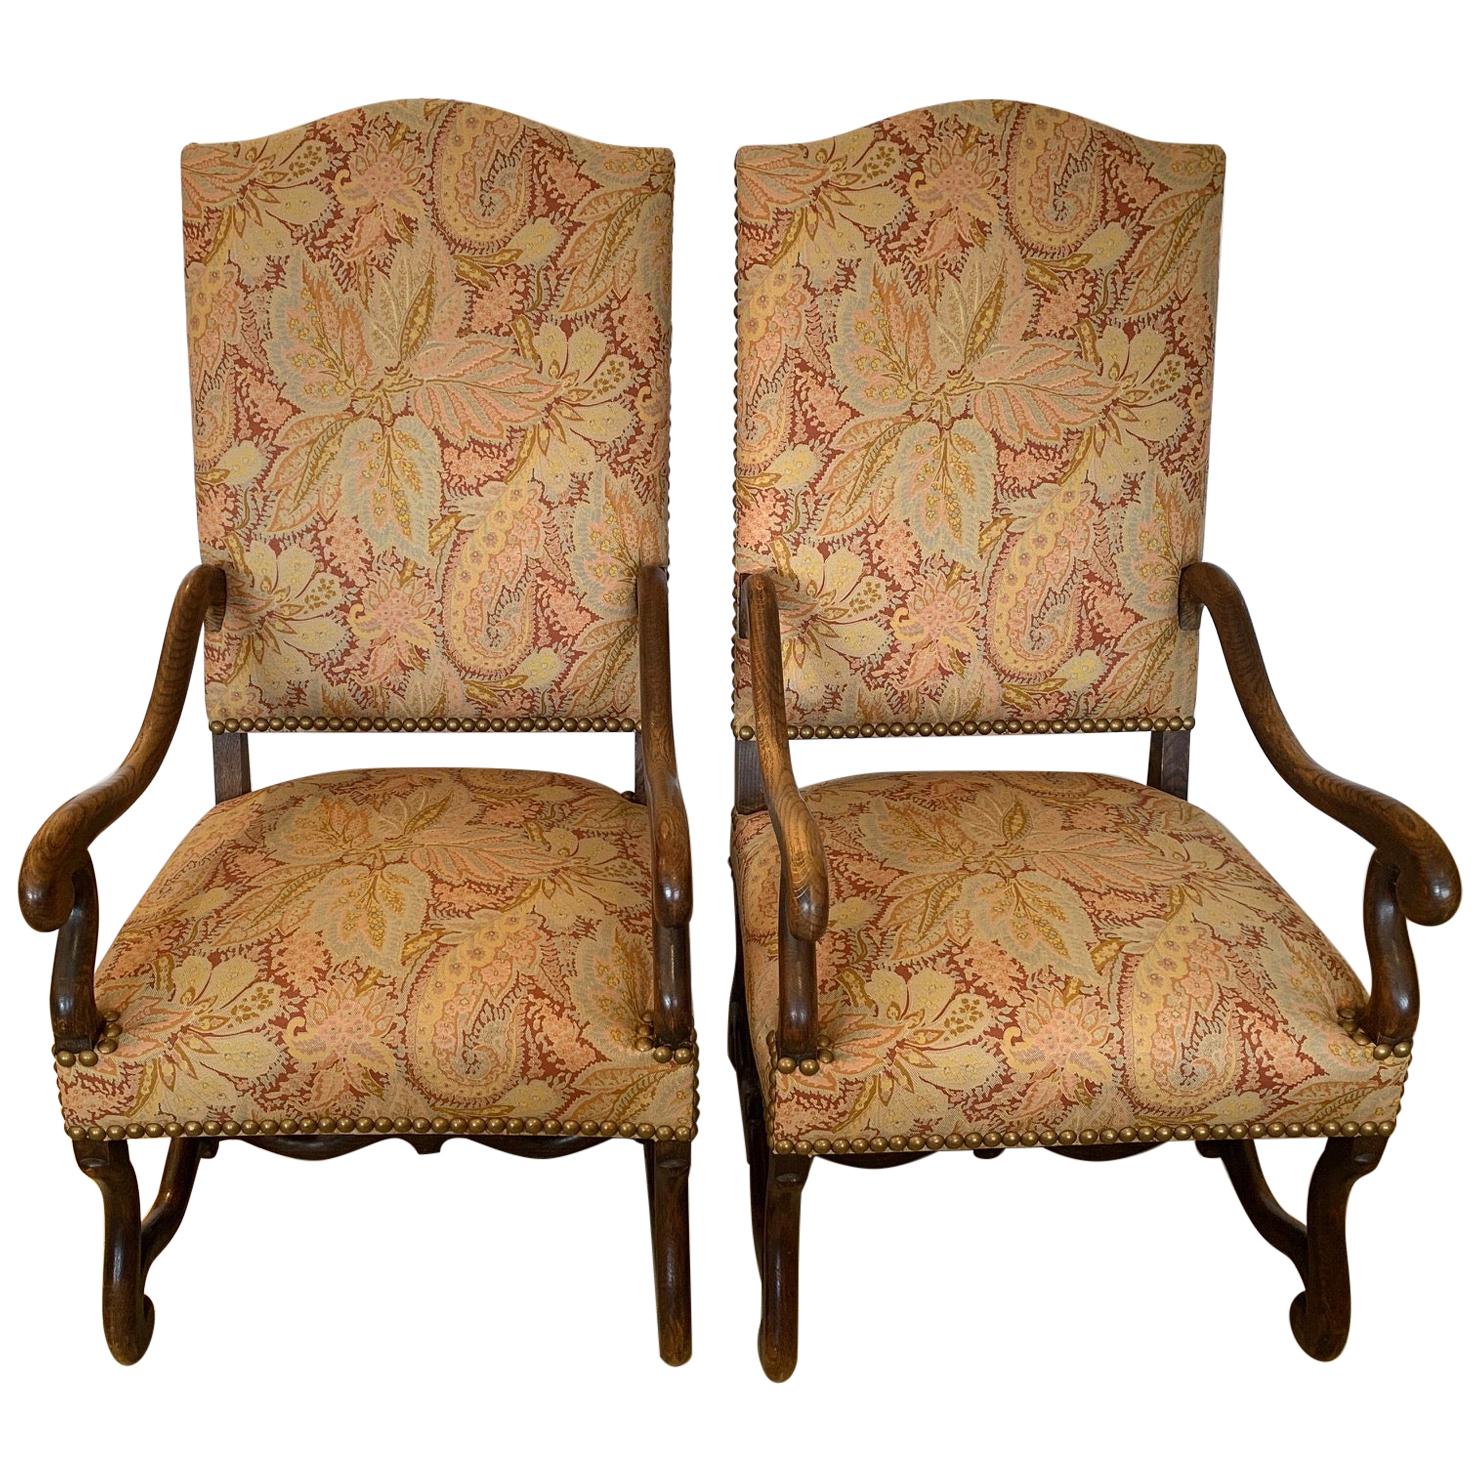 Stately Pair of High Back Antique Walnut and Upholstered Armchairs